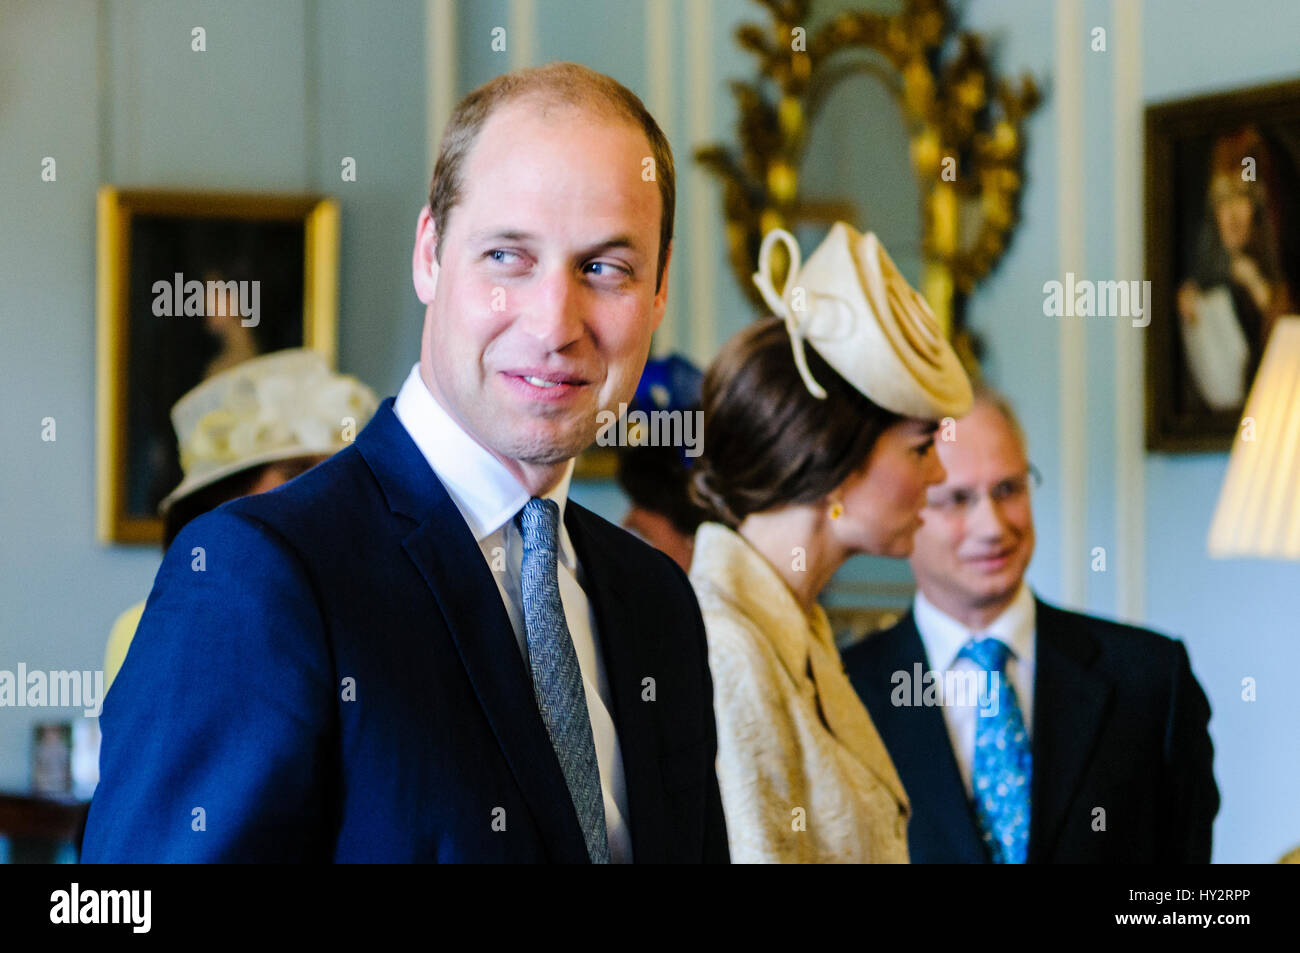 HILLSBOROUGH, NORTHERN IRELAND. 14 JUN 2016: Prince William, The Duke of Cambridge meets guests ahead of the the Secretary of State's annual garden party. Stock Photo